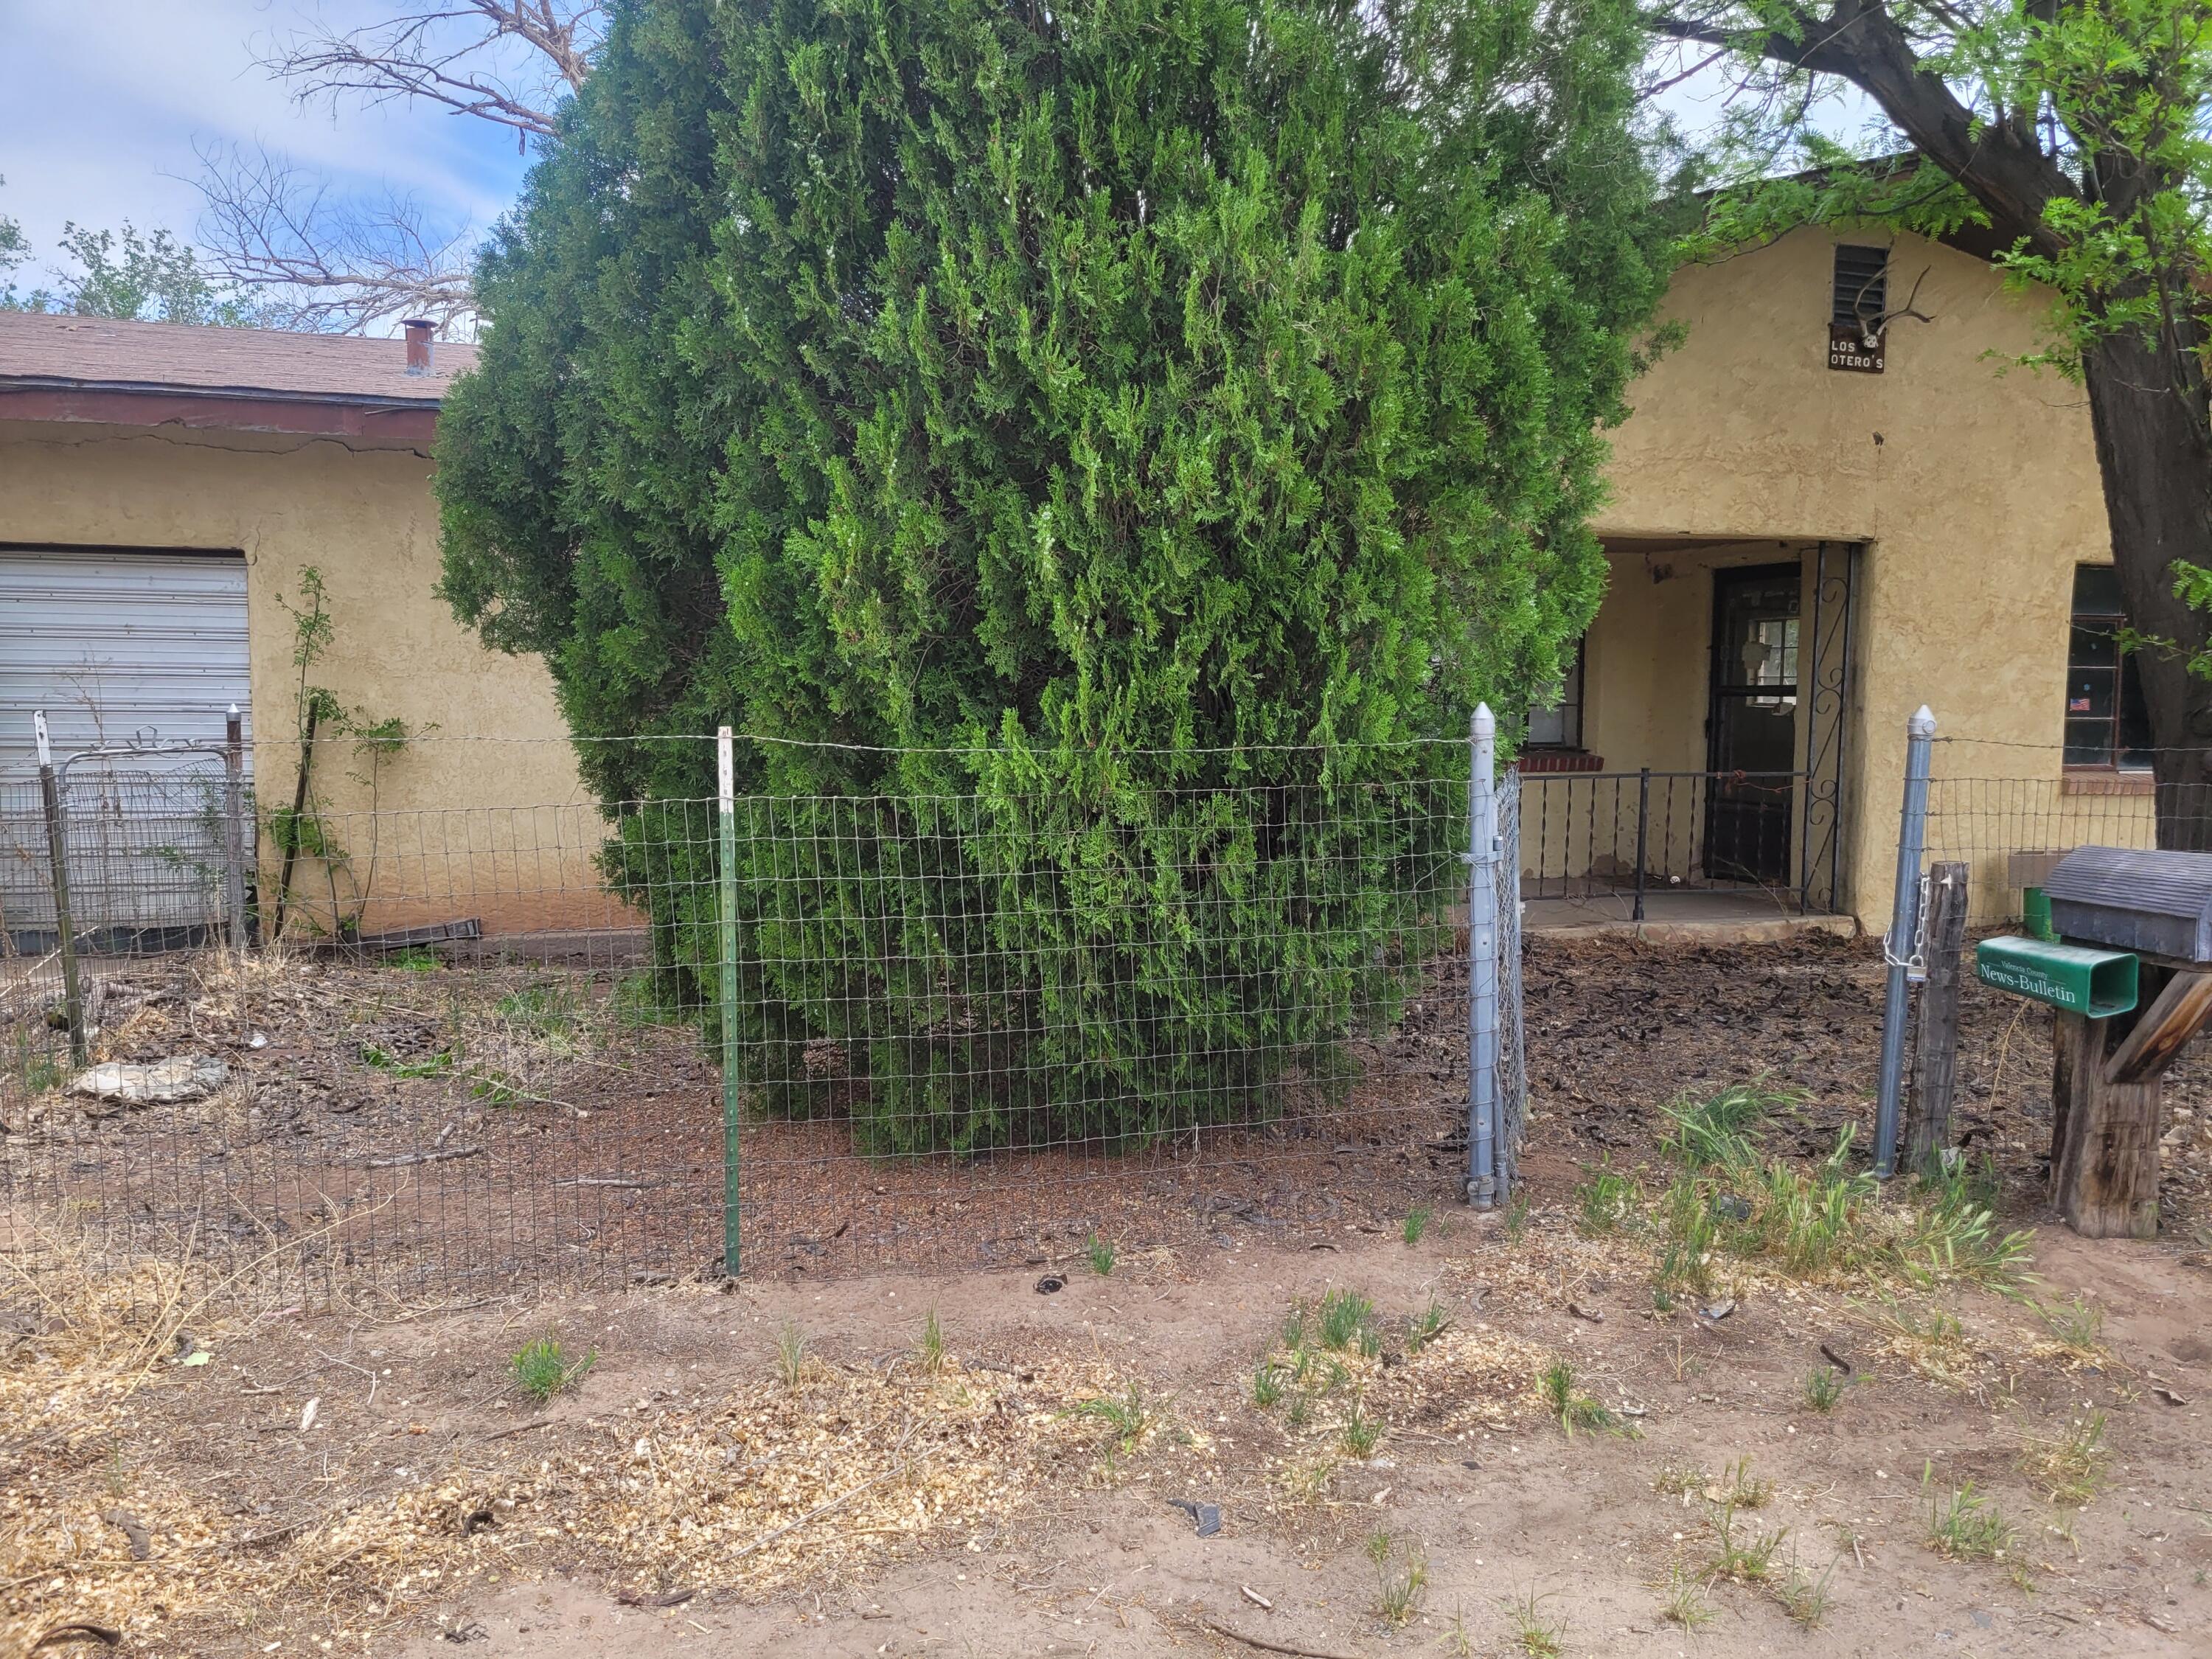 Wonderful property with tons of potential.  Lot has Utilites and a current single-family resident.  Home is in need of repair.   Lot has irrigation rights.  There are other structures on the property.  This is a must see.  Property is sold as is.